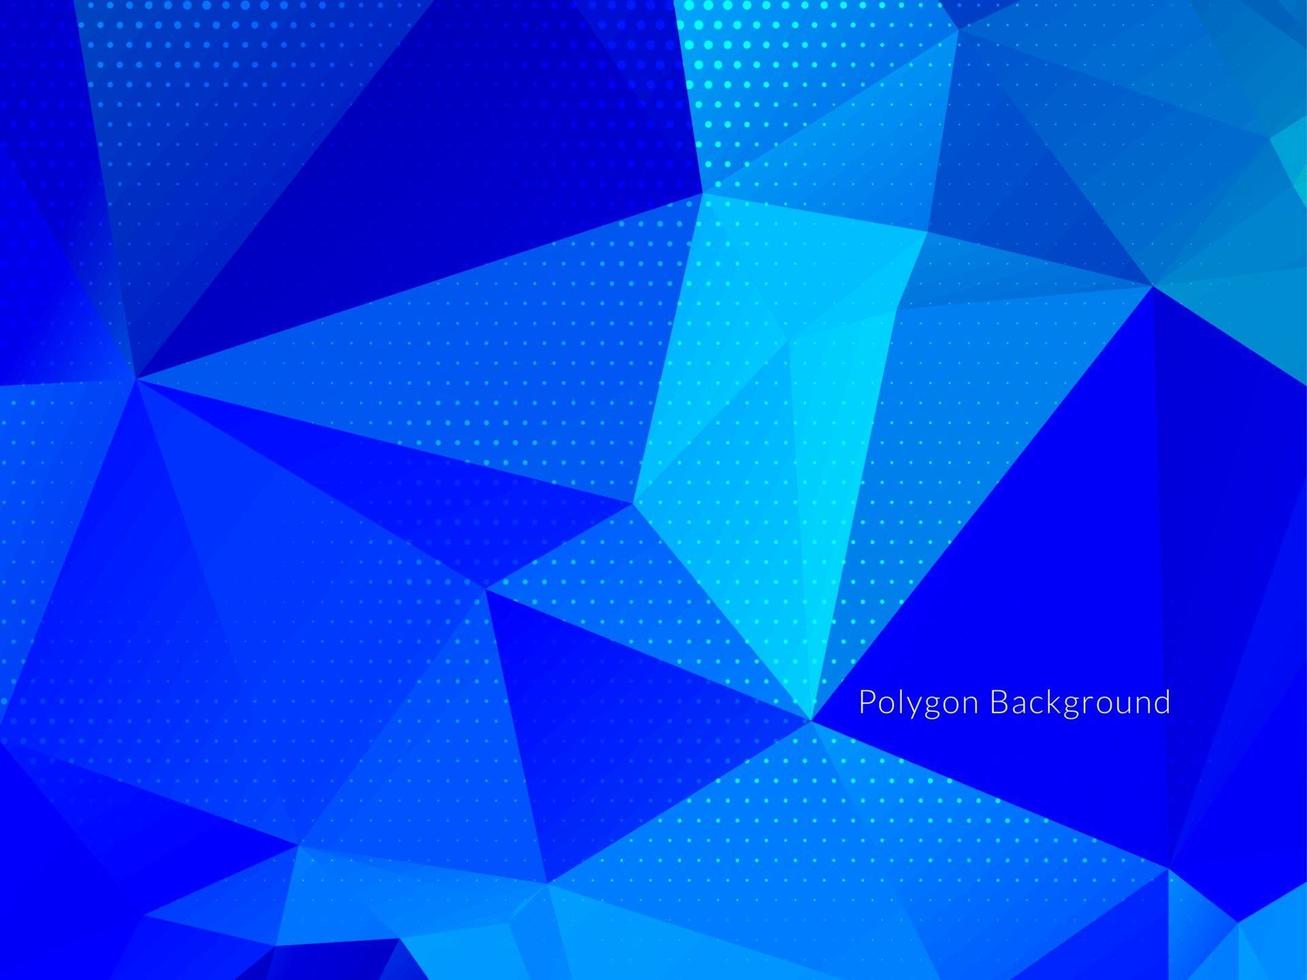 Abstract colorful triangular geometric crystal background vector